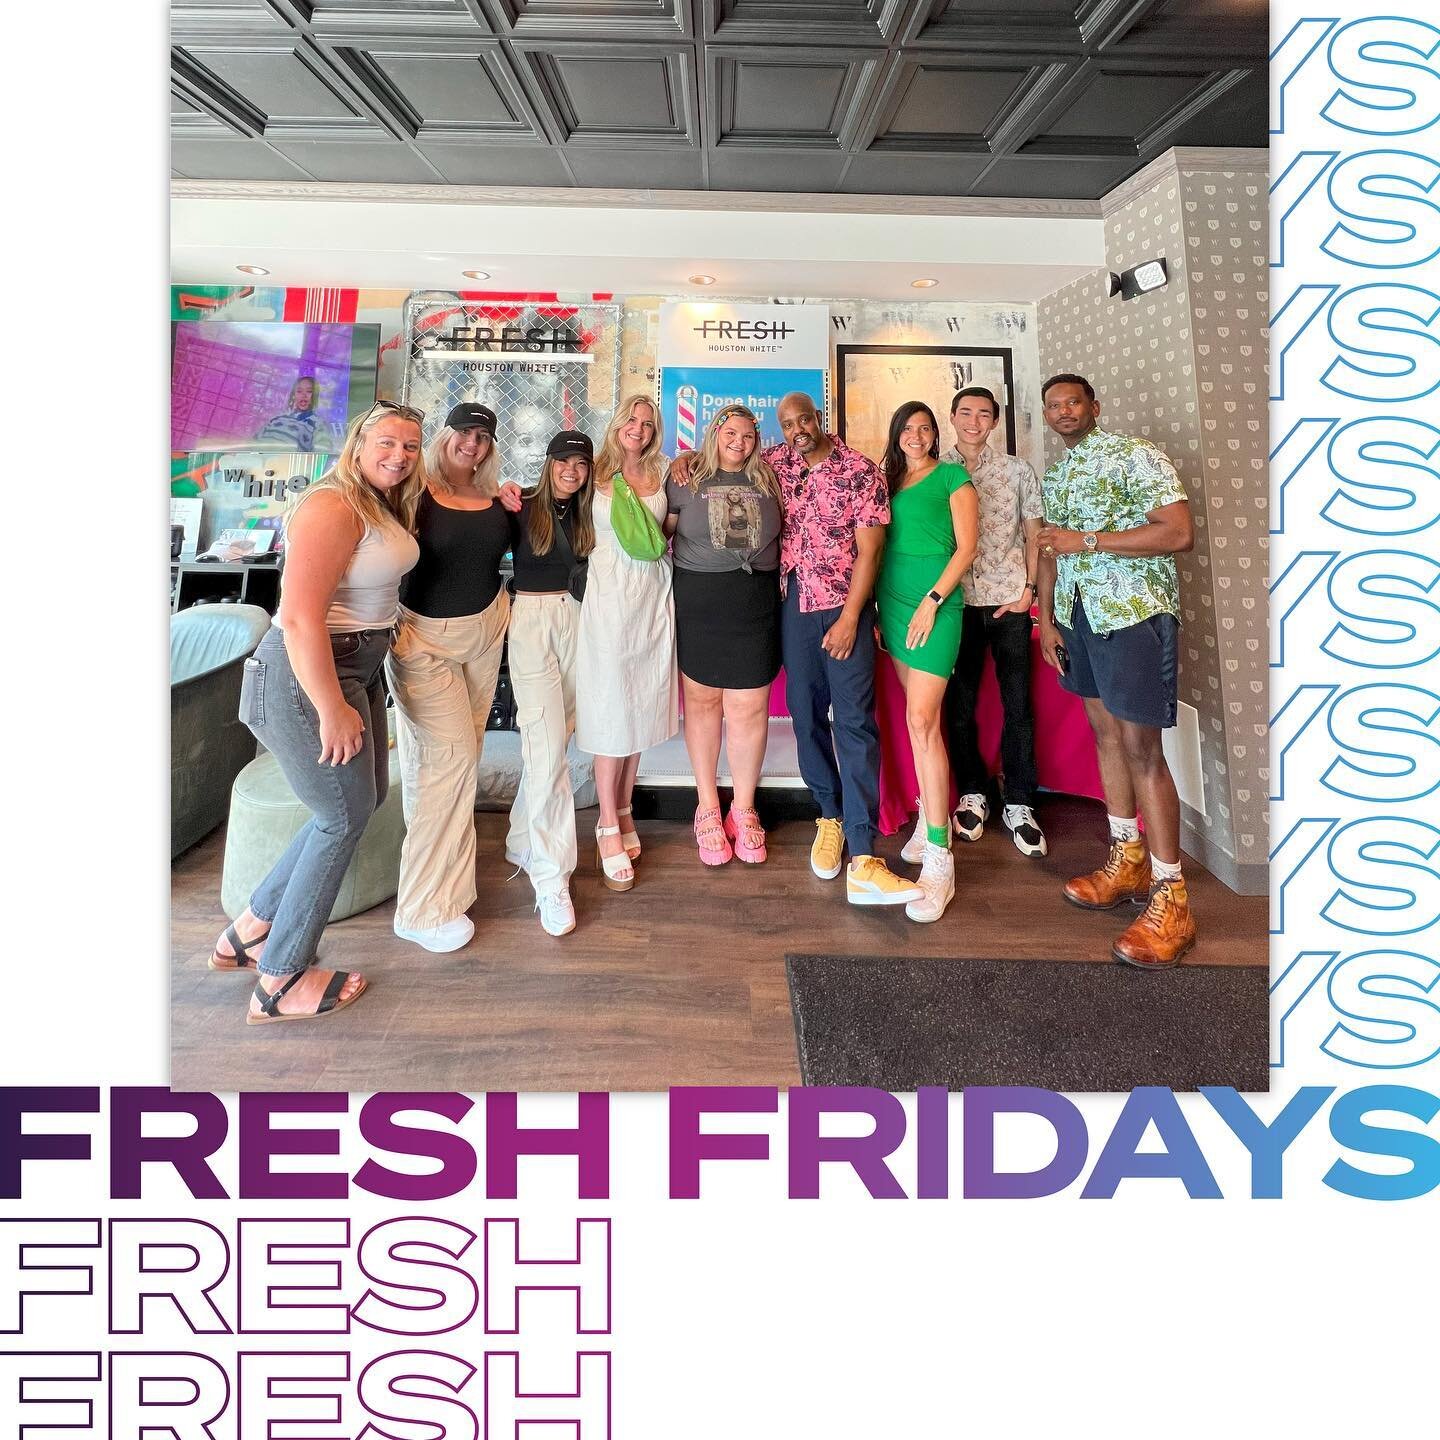 Stop by FRESH FRIDAYS today! Grab a free t-shirt, share a story, do some culture making.